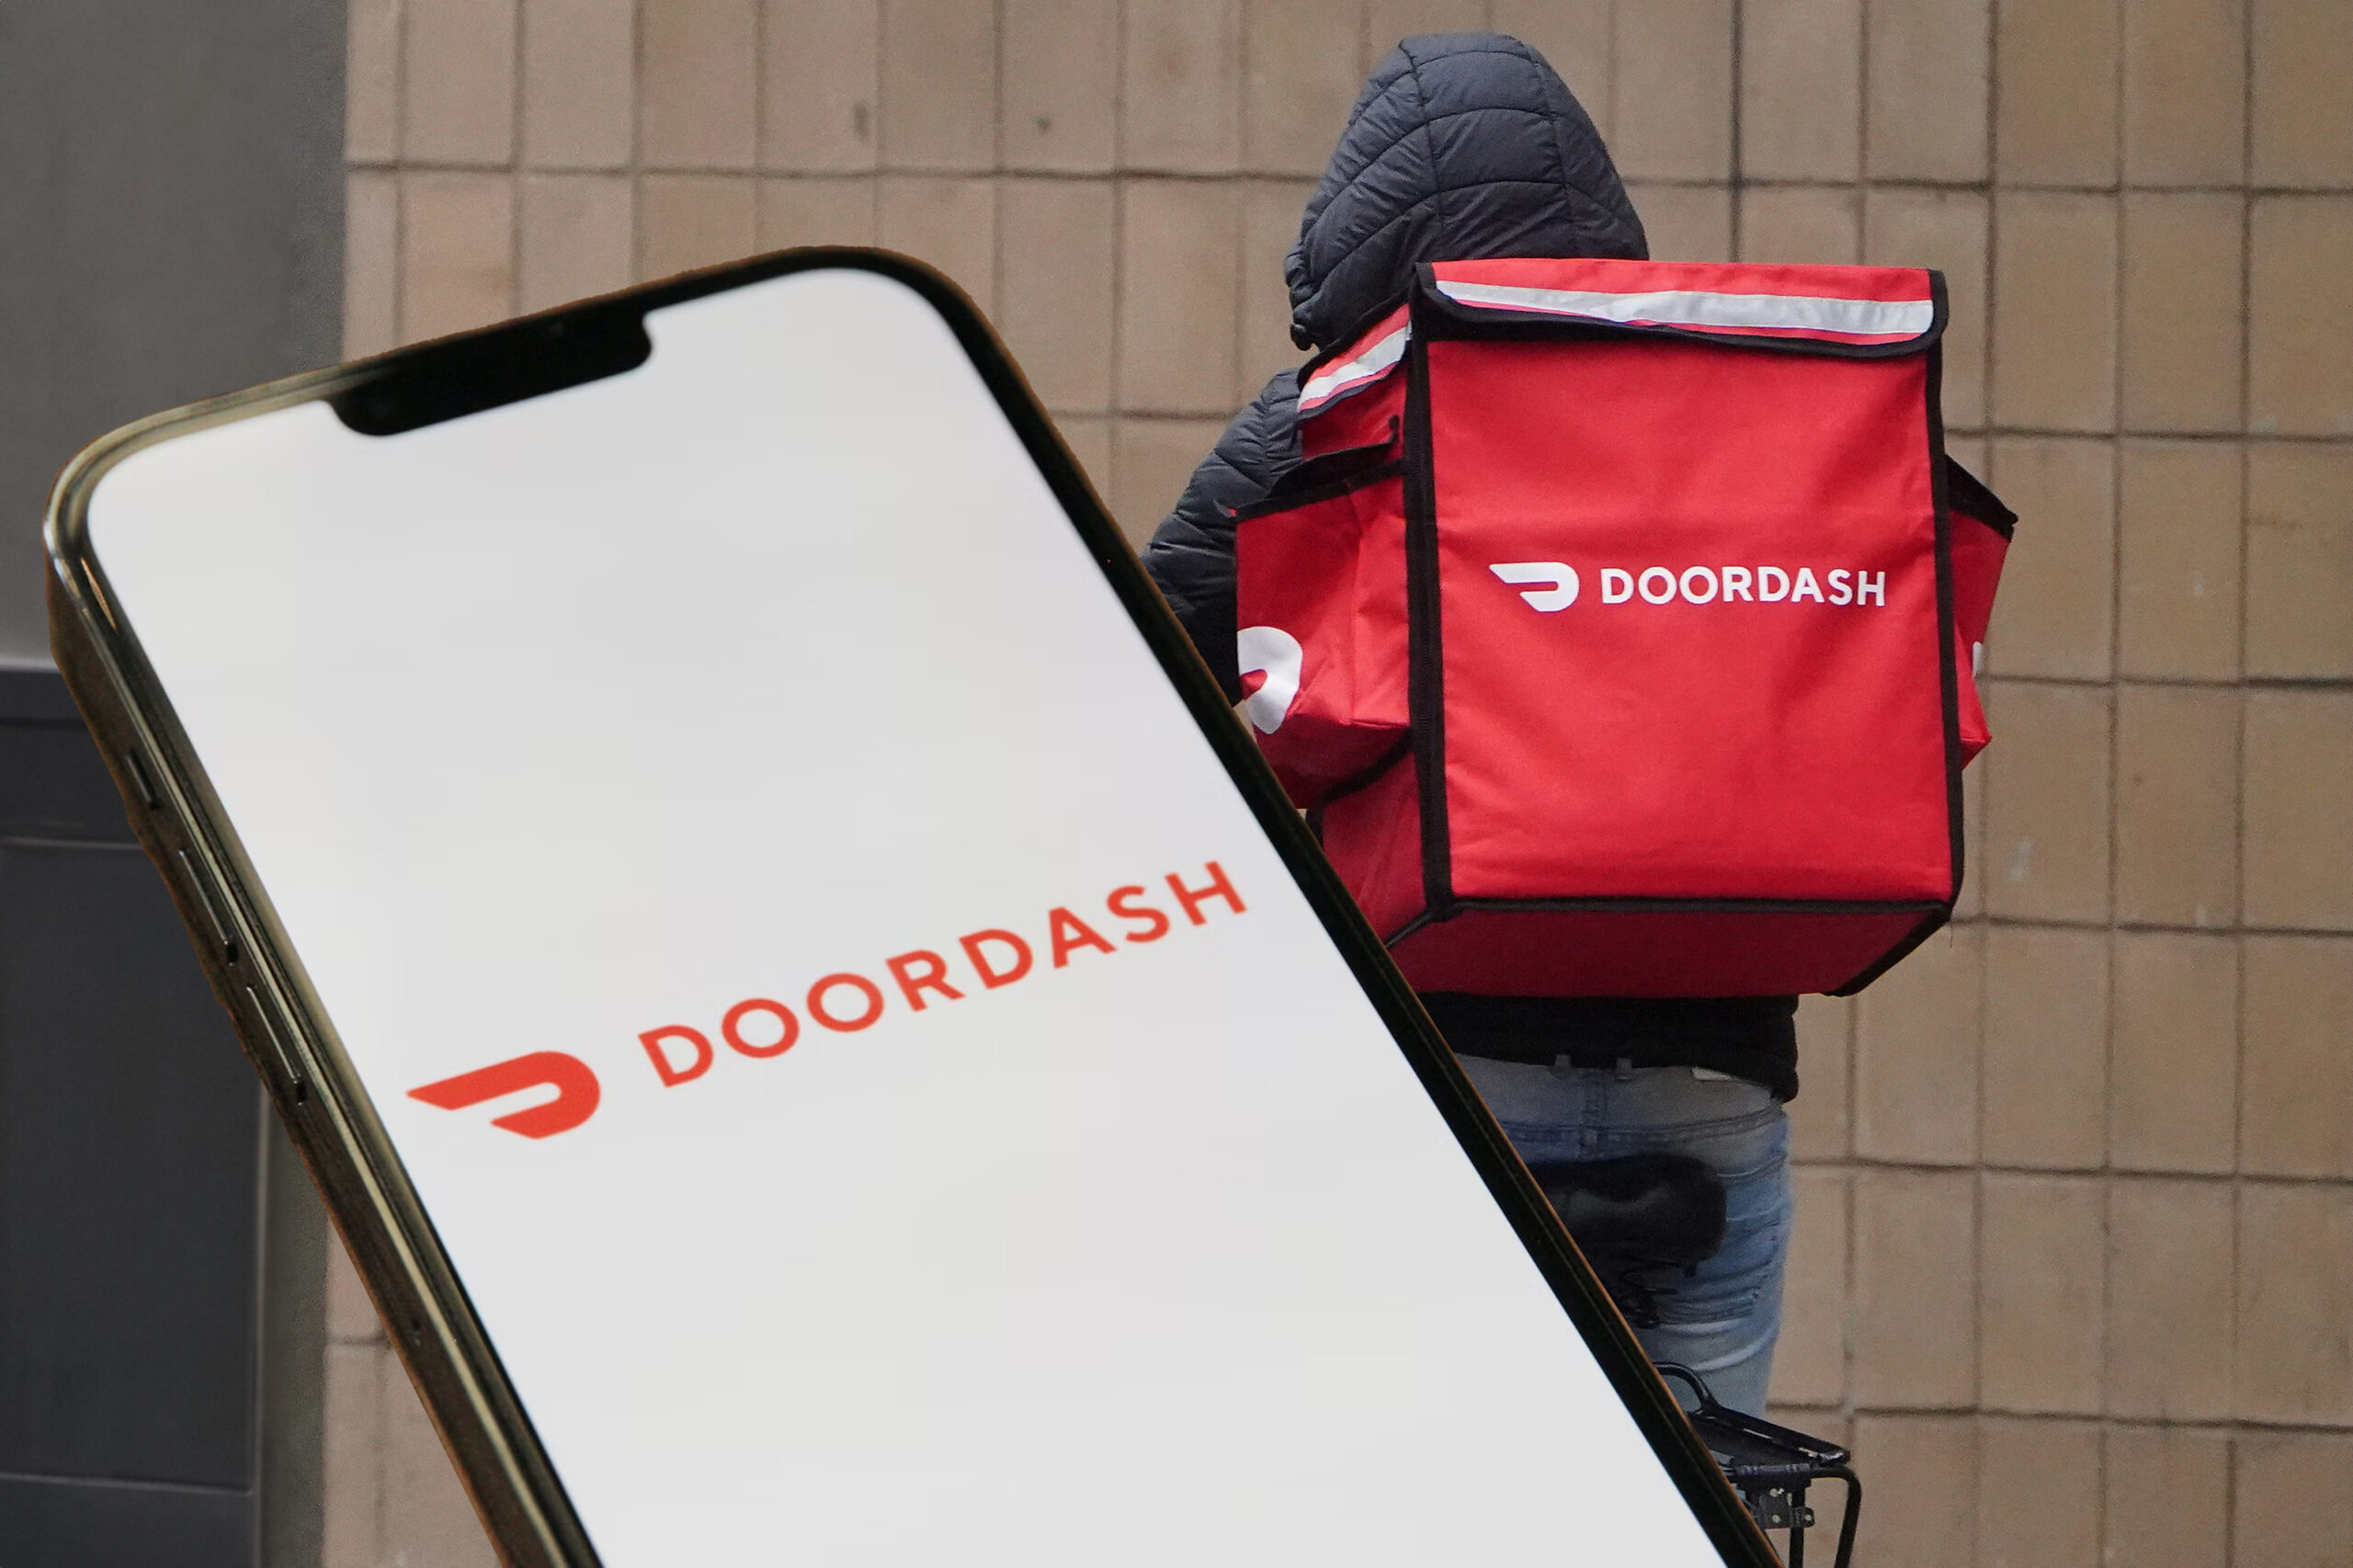 DoorDash Is Charging iPhone Users More than Android Users, Lawsuit